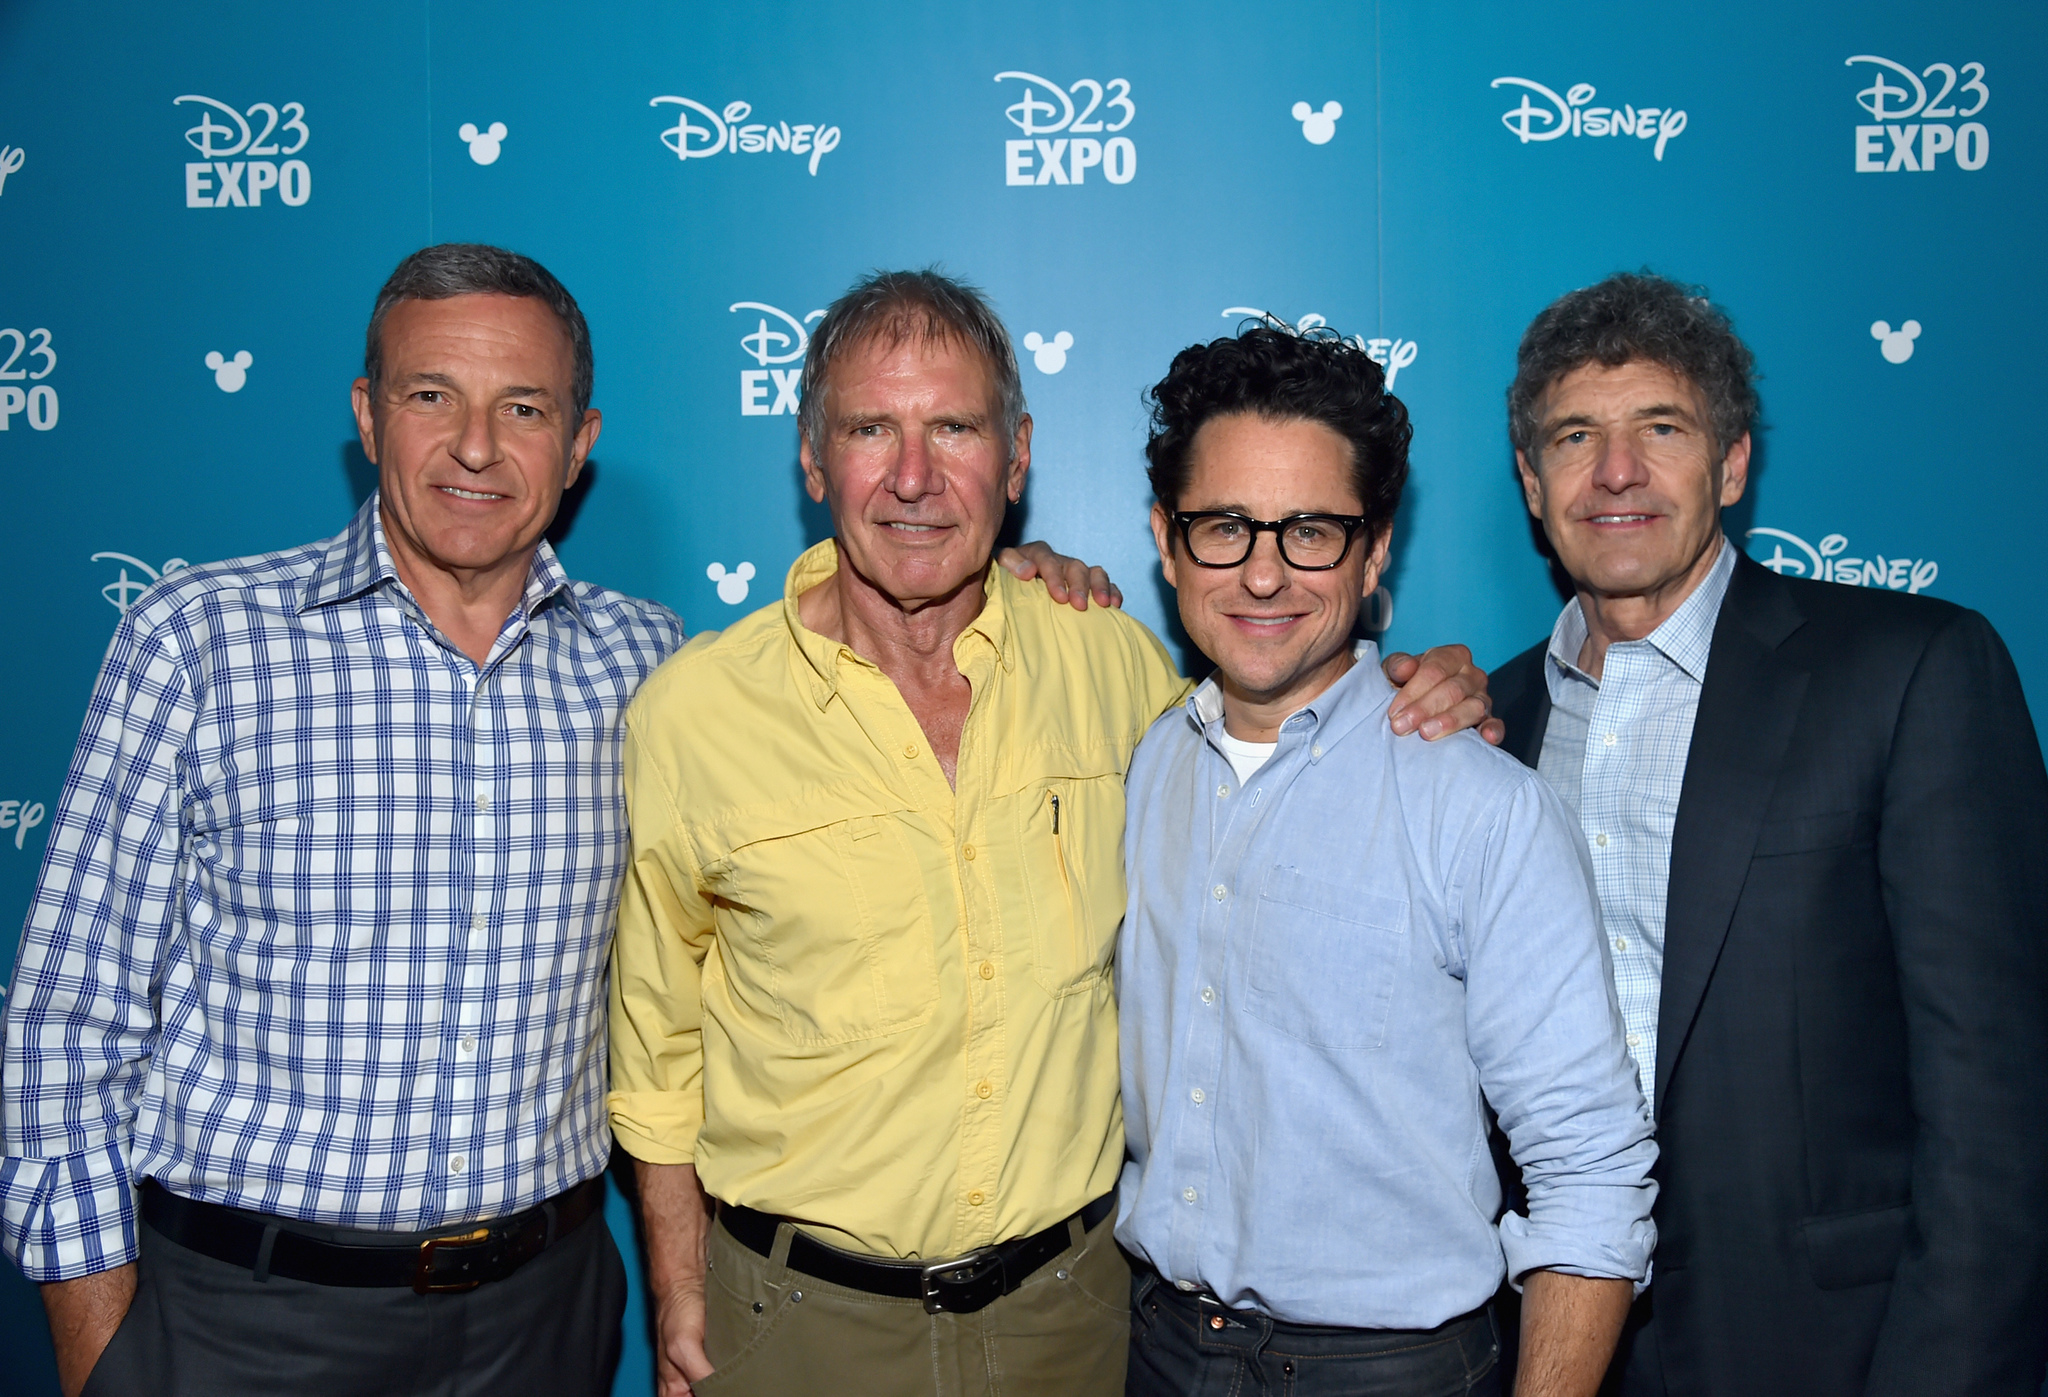 Harrison Ford, J.J. Abrams, Alan Horn and Robert A. Iger